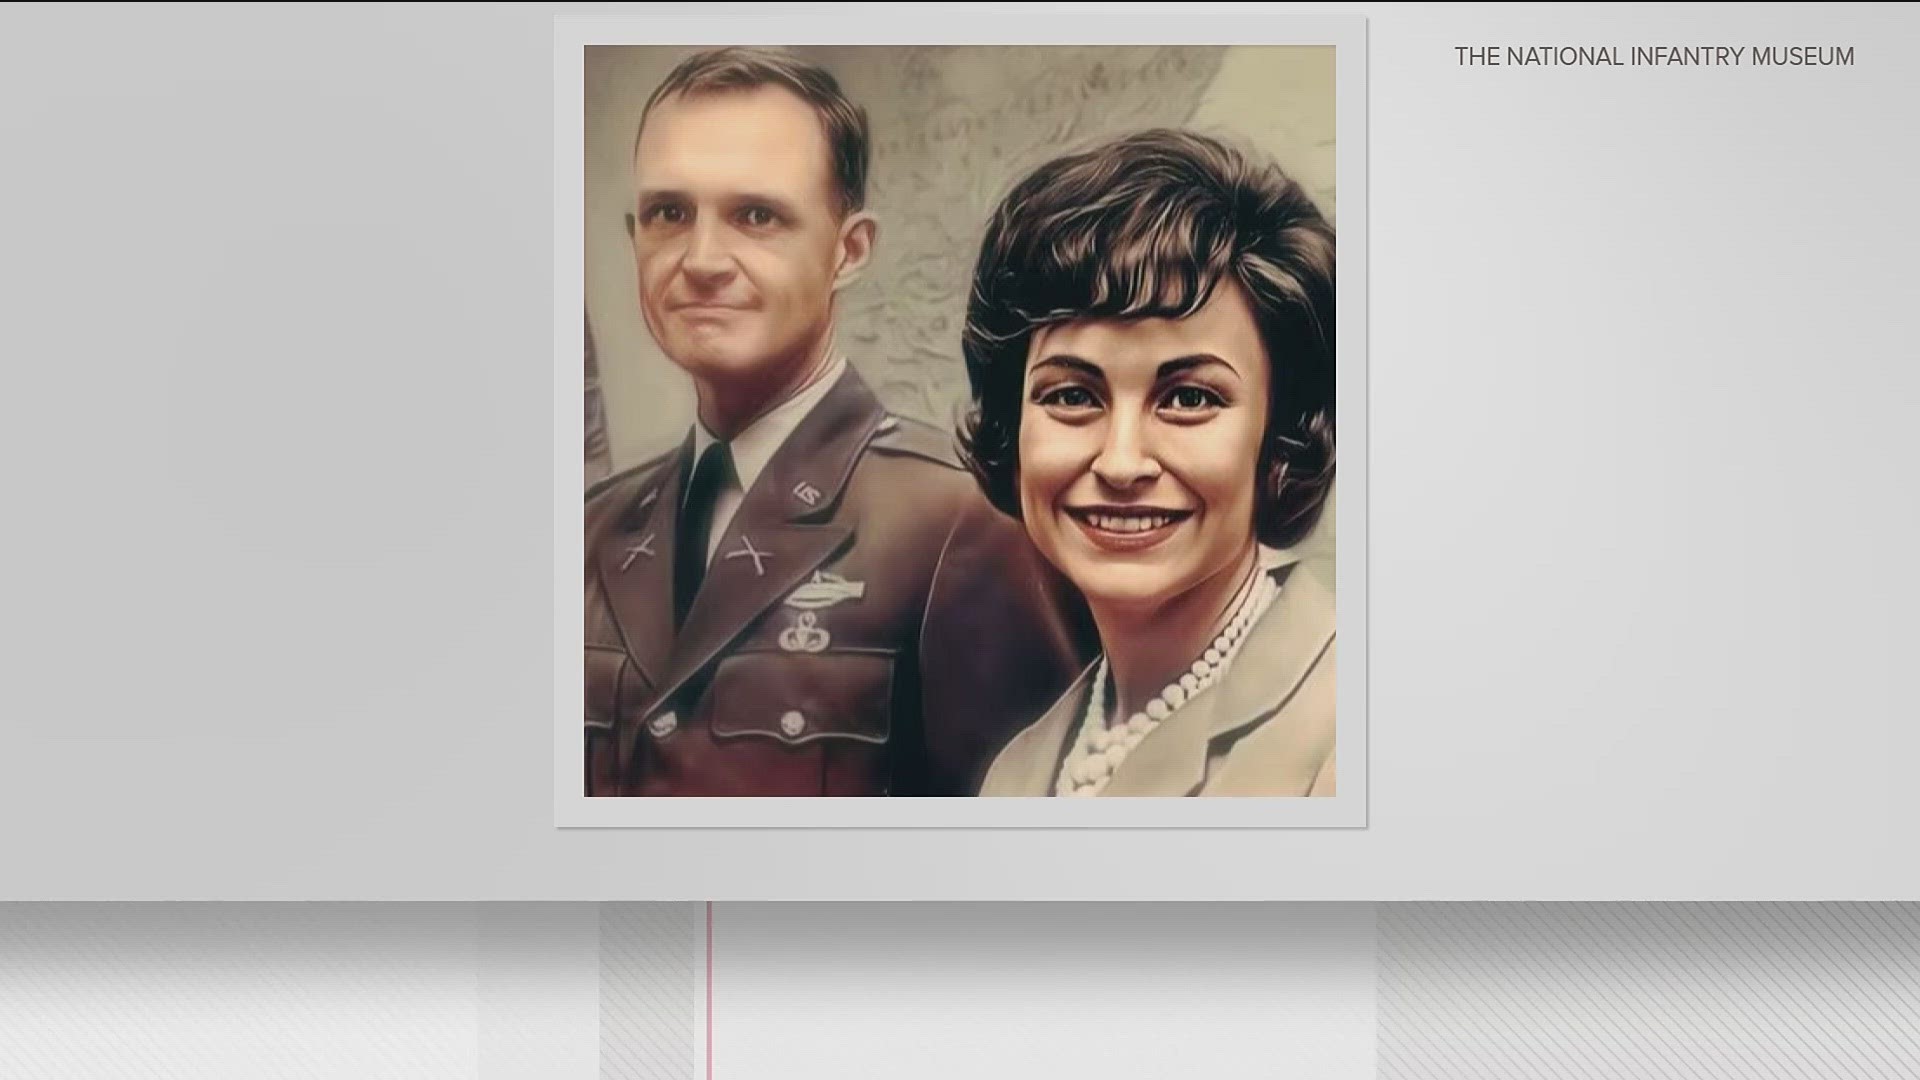 The new name change honors Lt. Gen. Harold and Julia Moore.